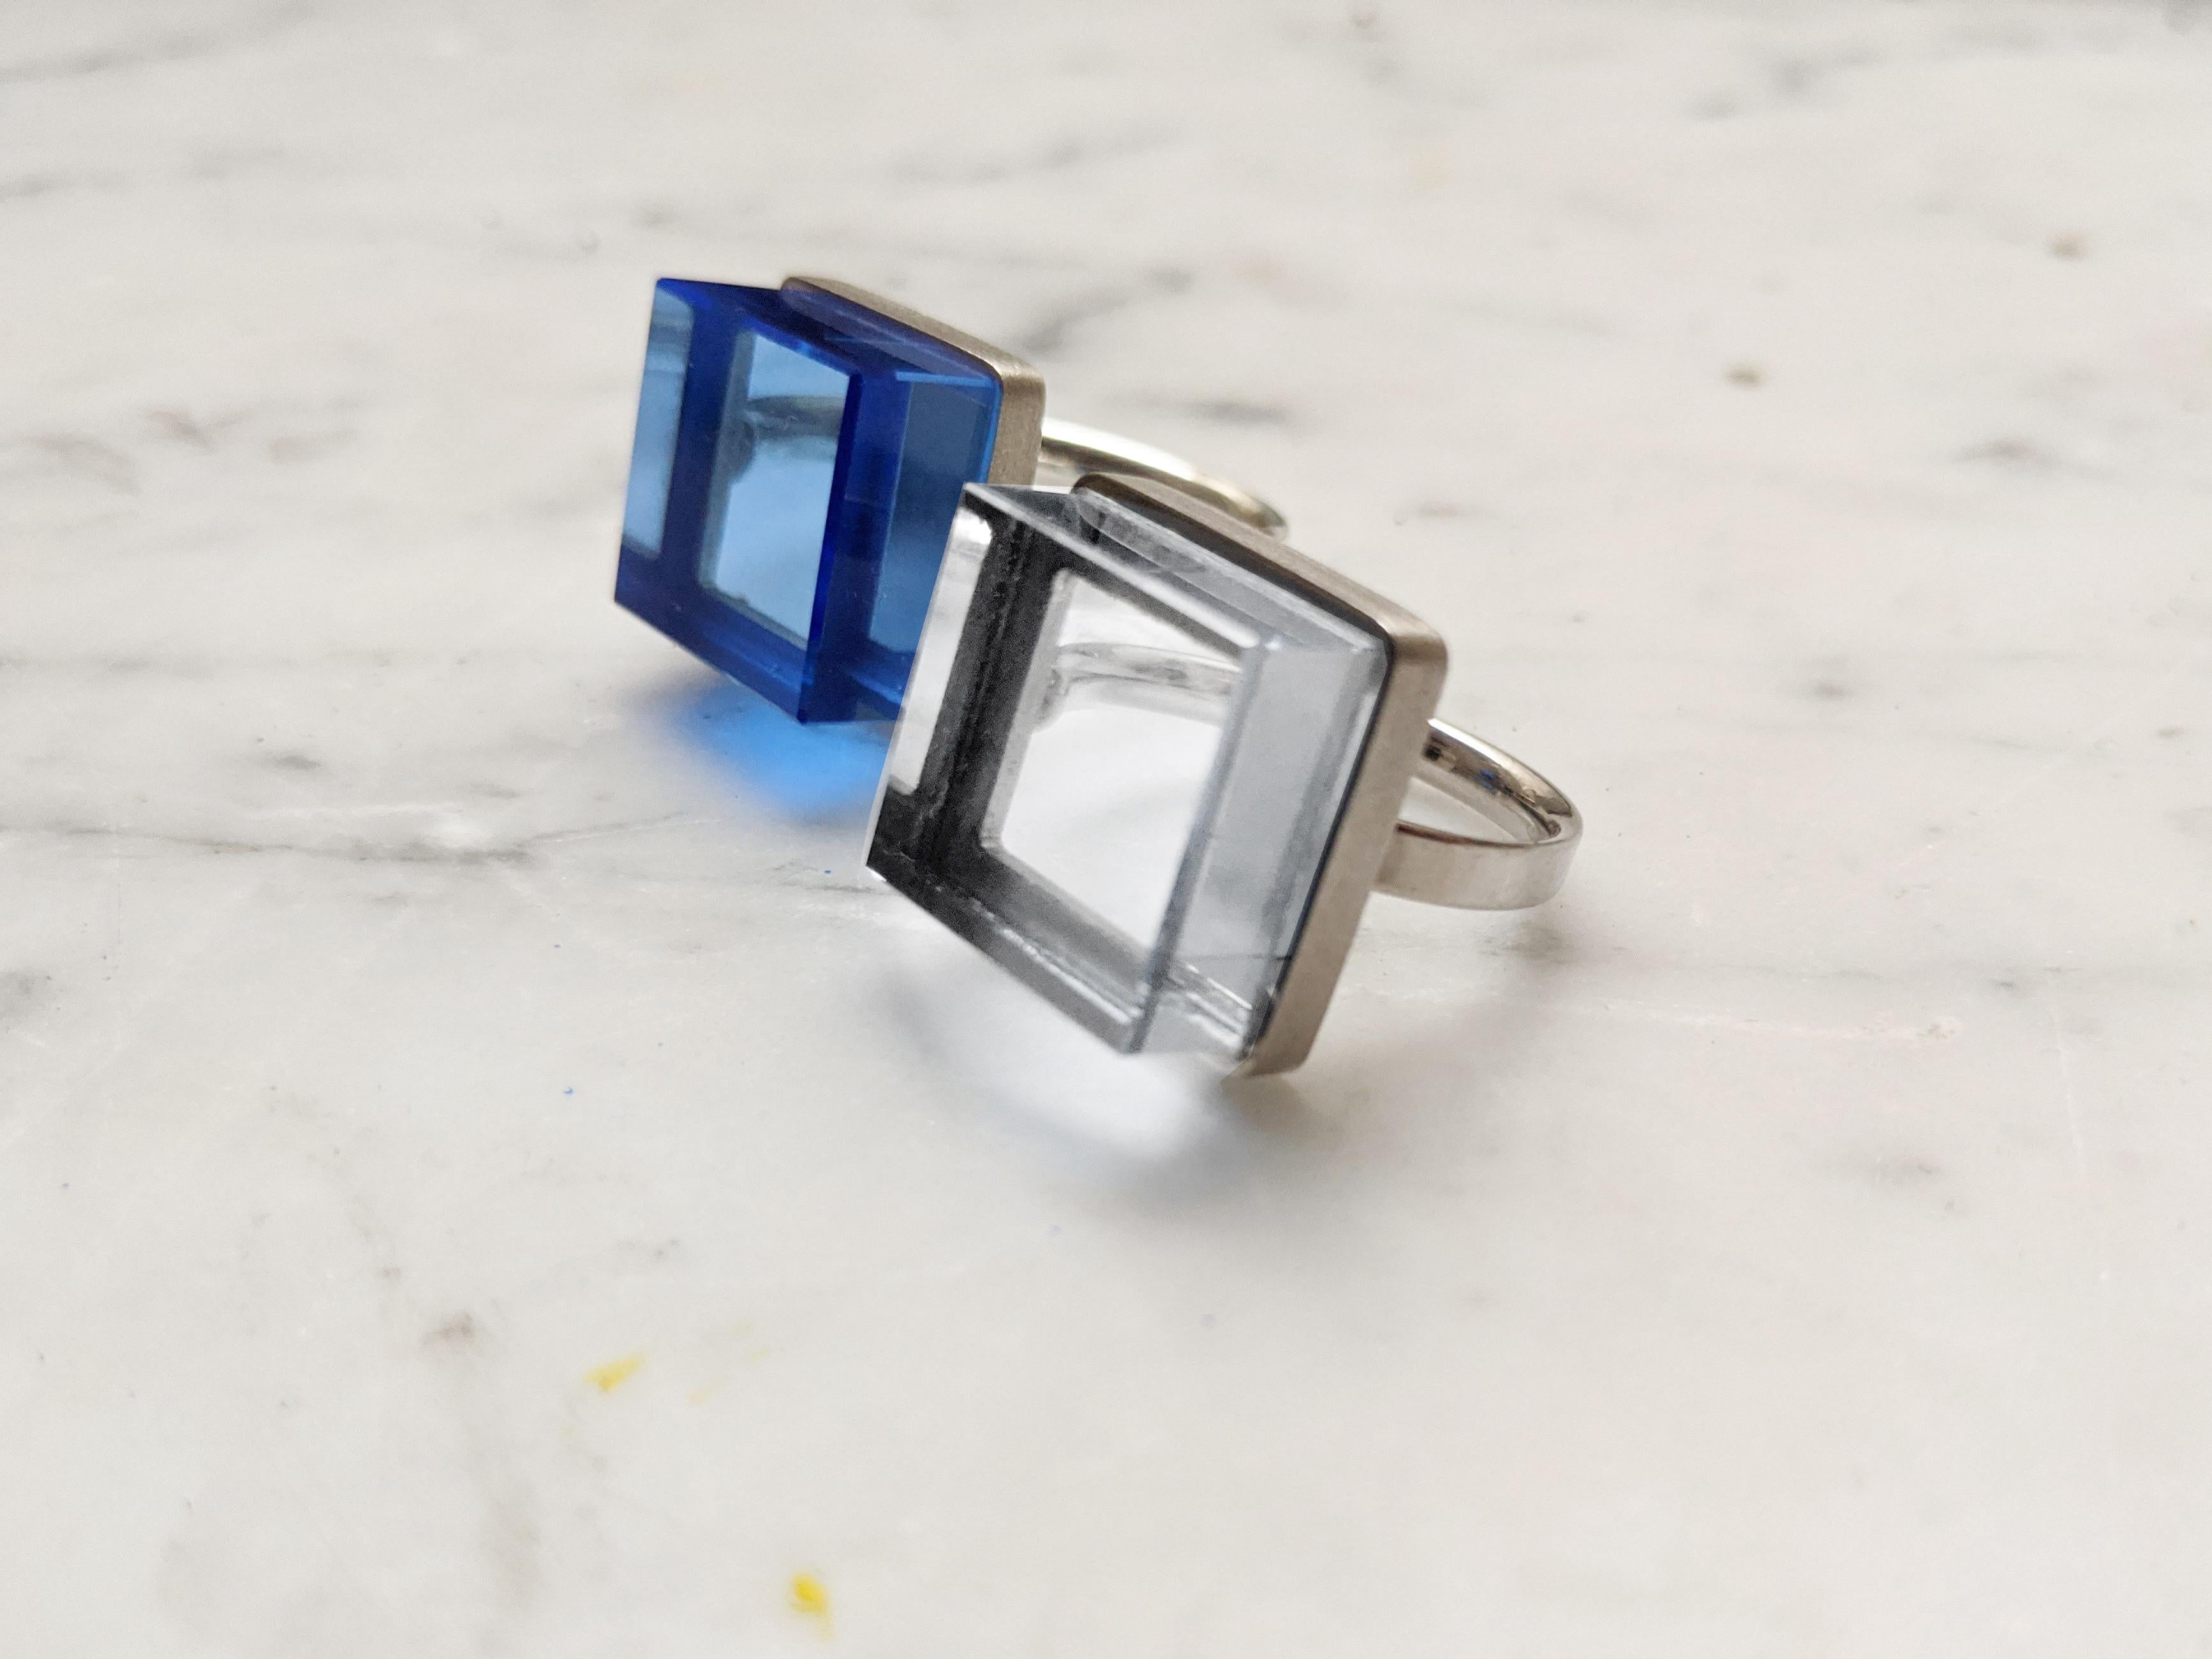 Mixed Cut White Gold Art Deco Style Ring with Quartz by Artist Featured in Vogue For Sale